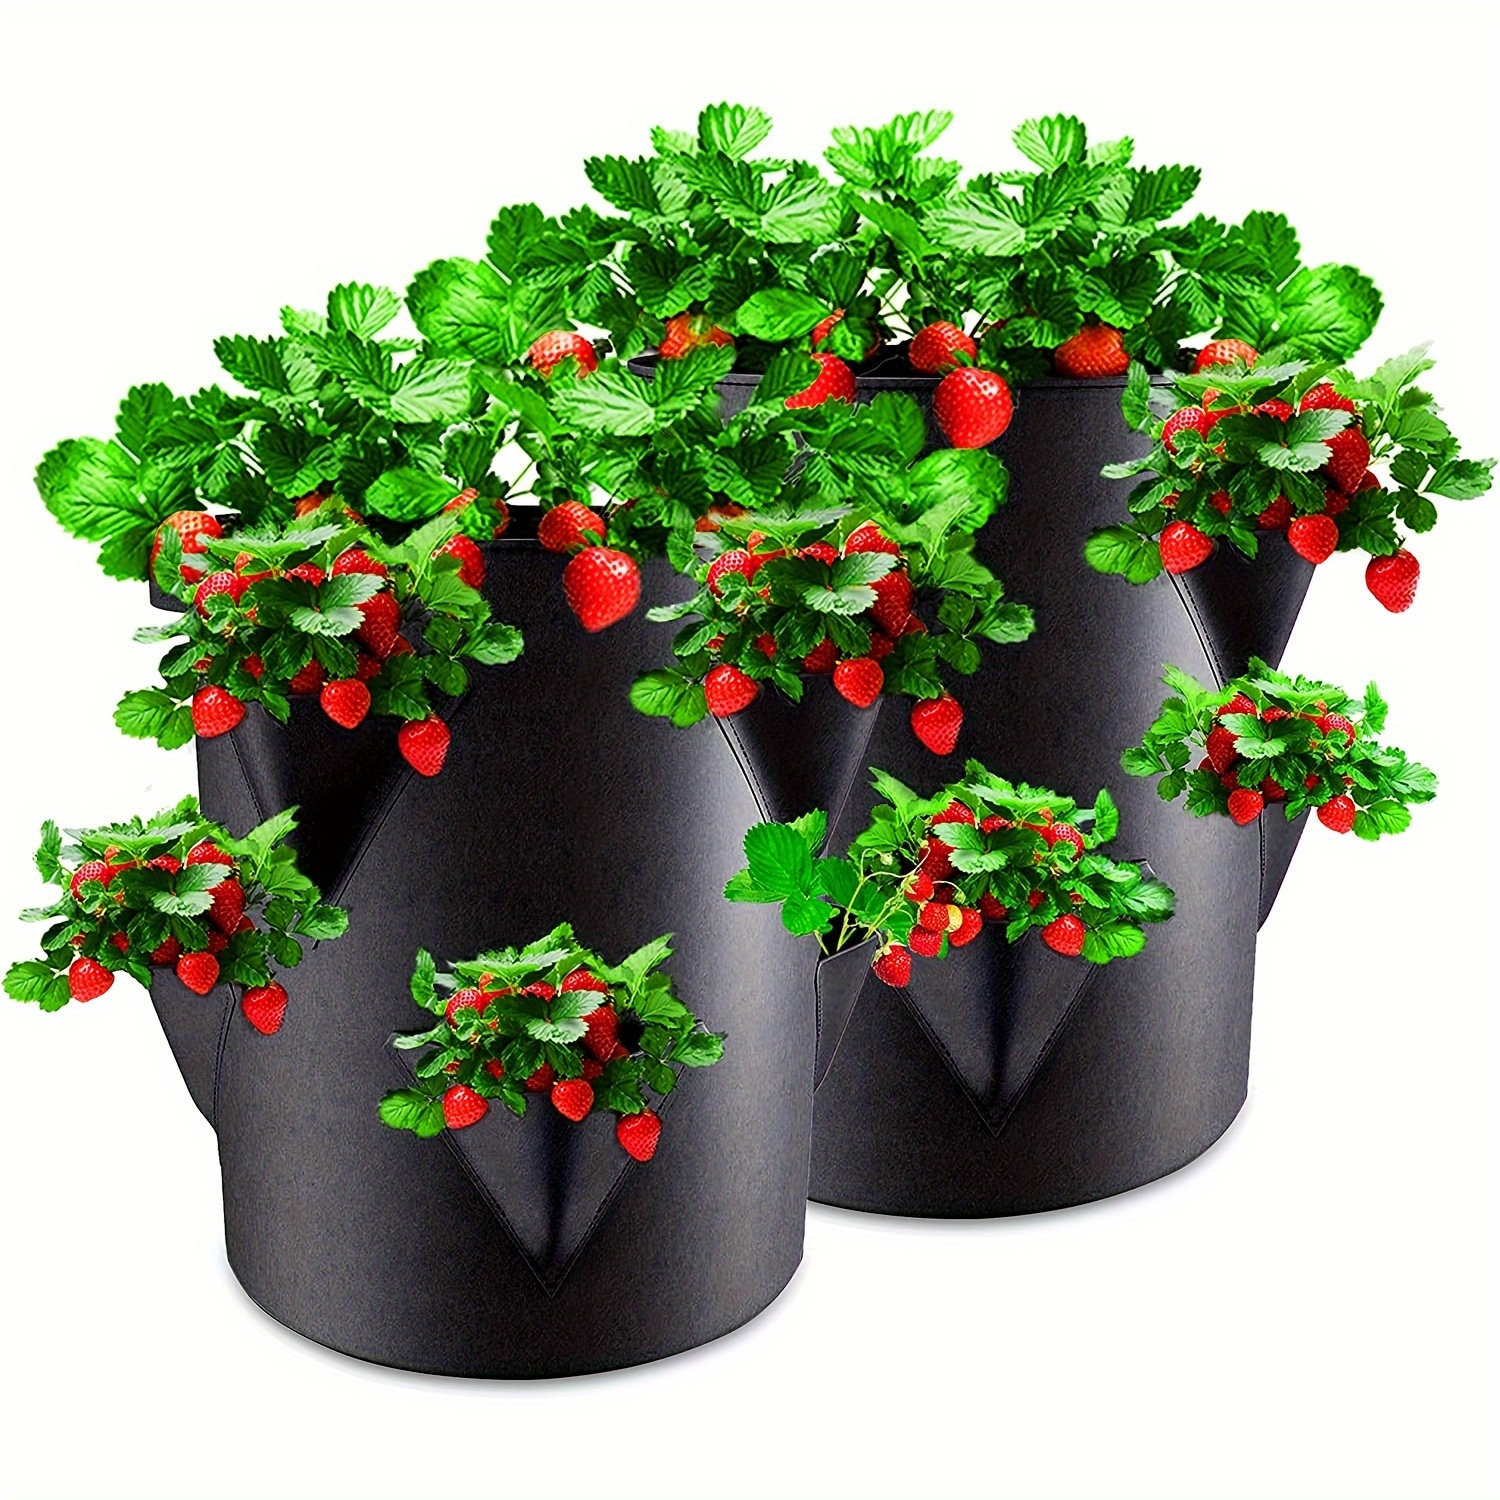 

2 Packs, 10 Gallon Strawberry Planting Bags,planting Pots With Window And Handle For Indoor & Outdoor Strawberry/carrot Onion Tomato Potato Roses/hot Peppers/plant Containers Black